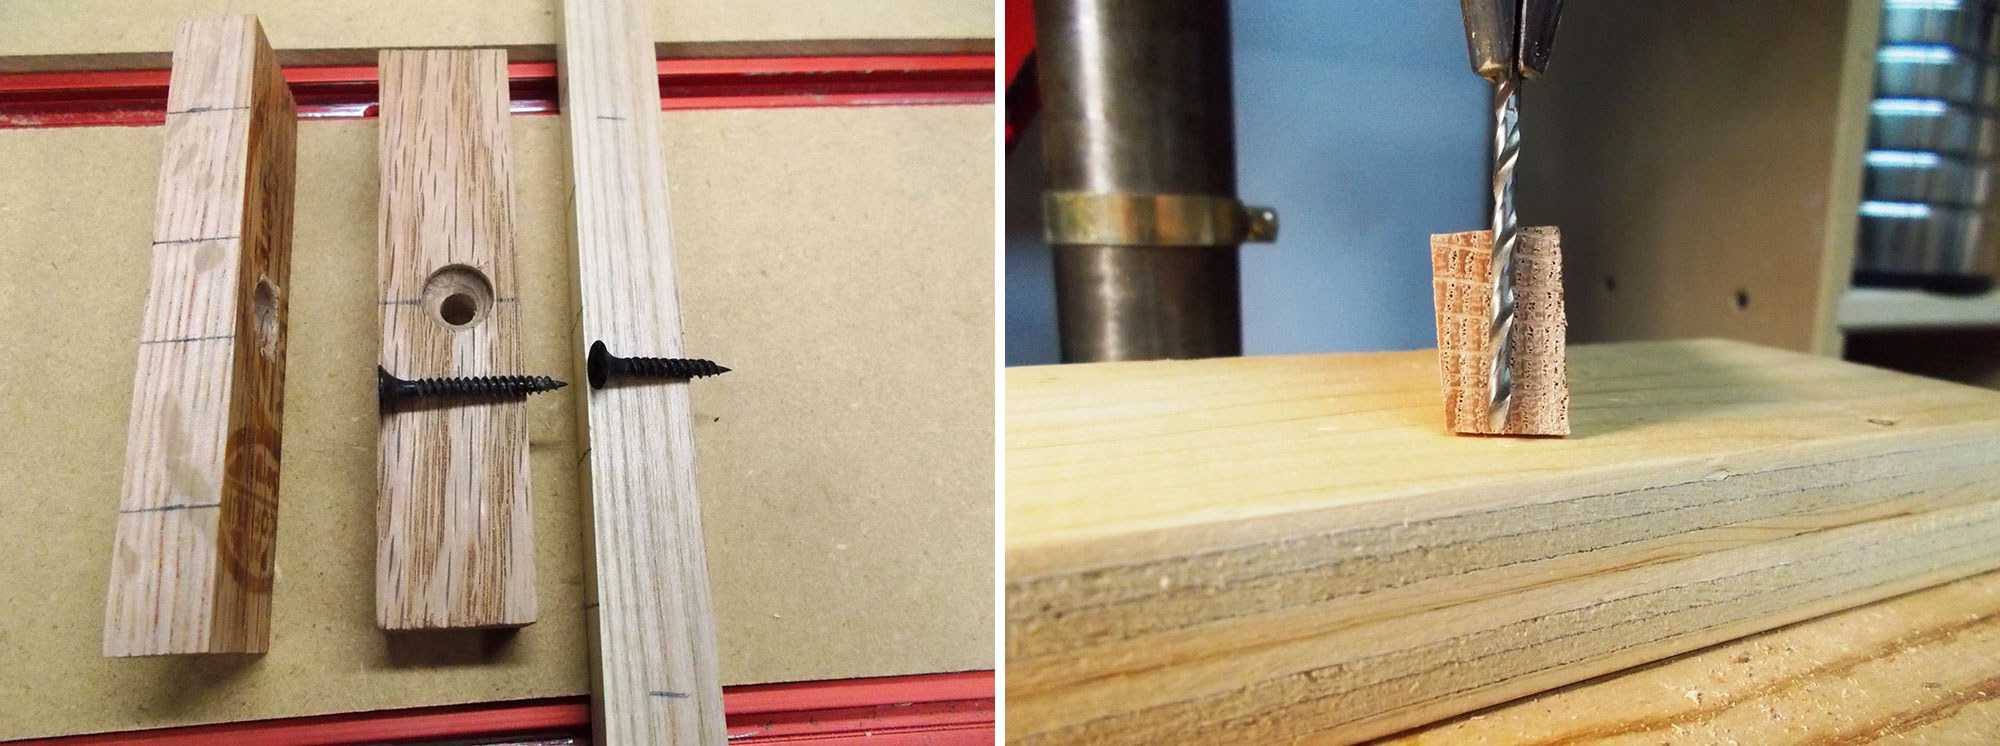 Image left: Three hardwood blocks with screws through two of them. Image right: Drill with hardwood block on top of man-made board.